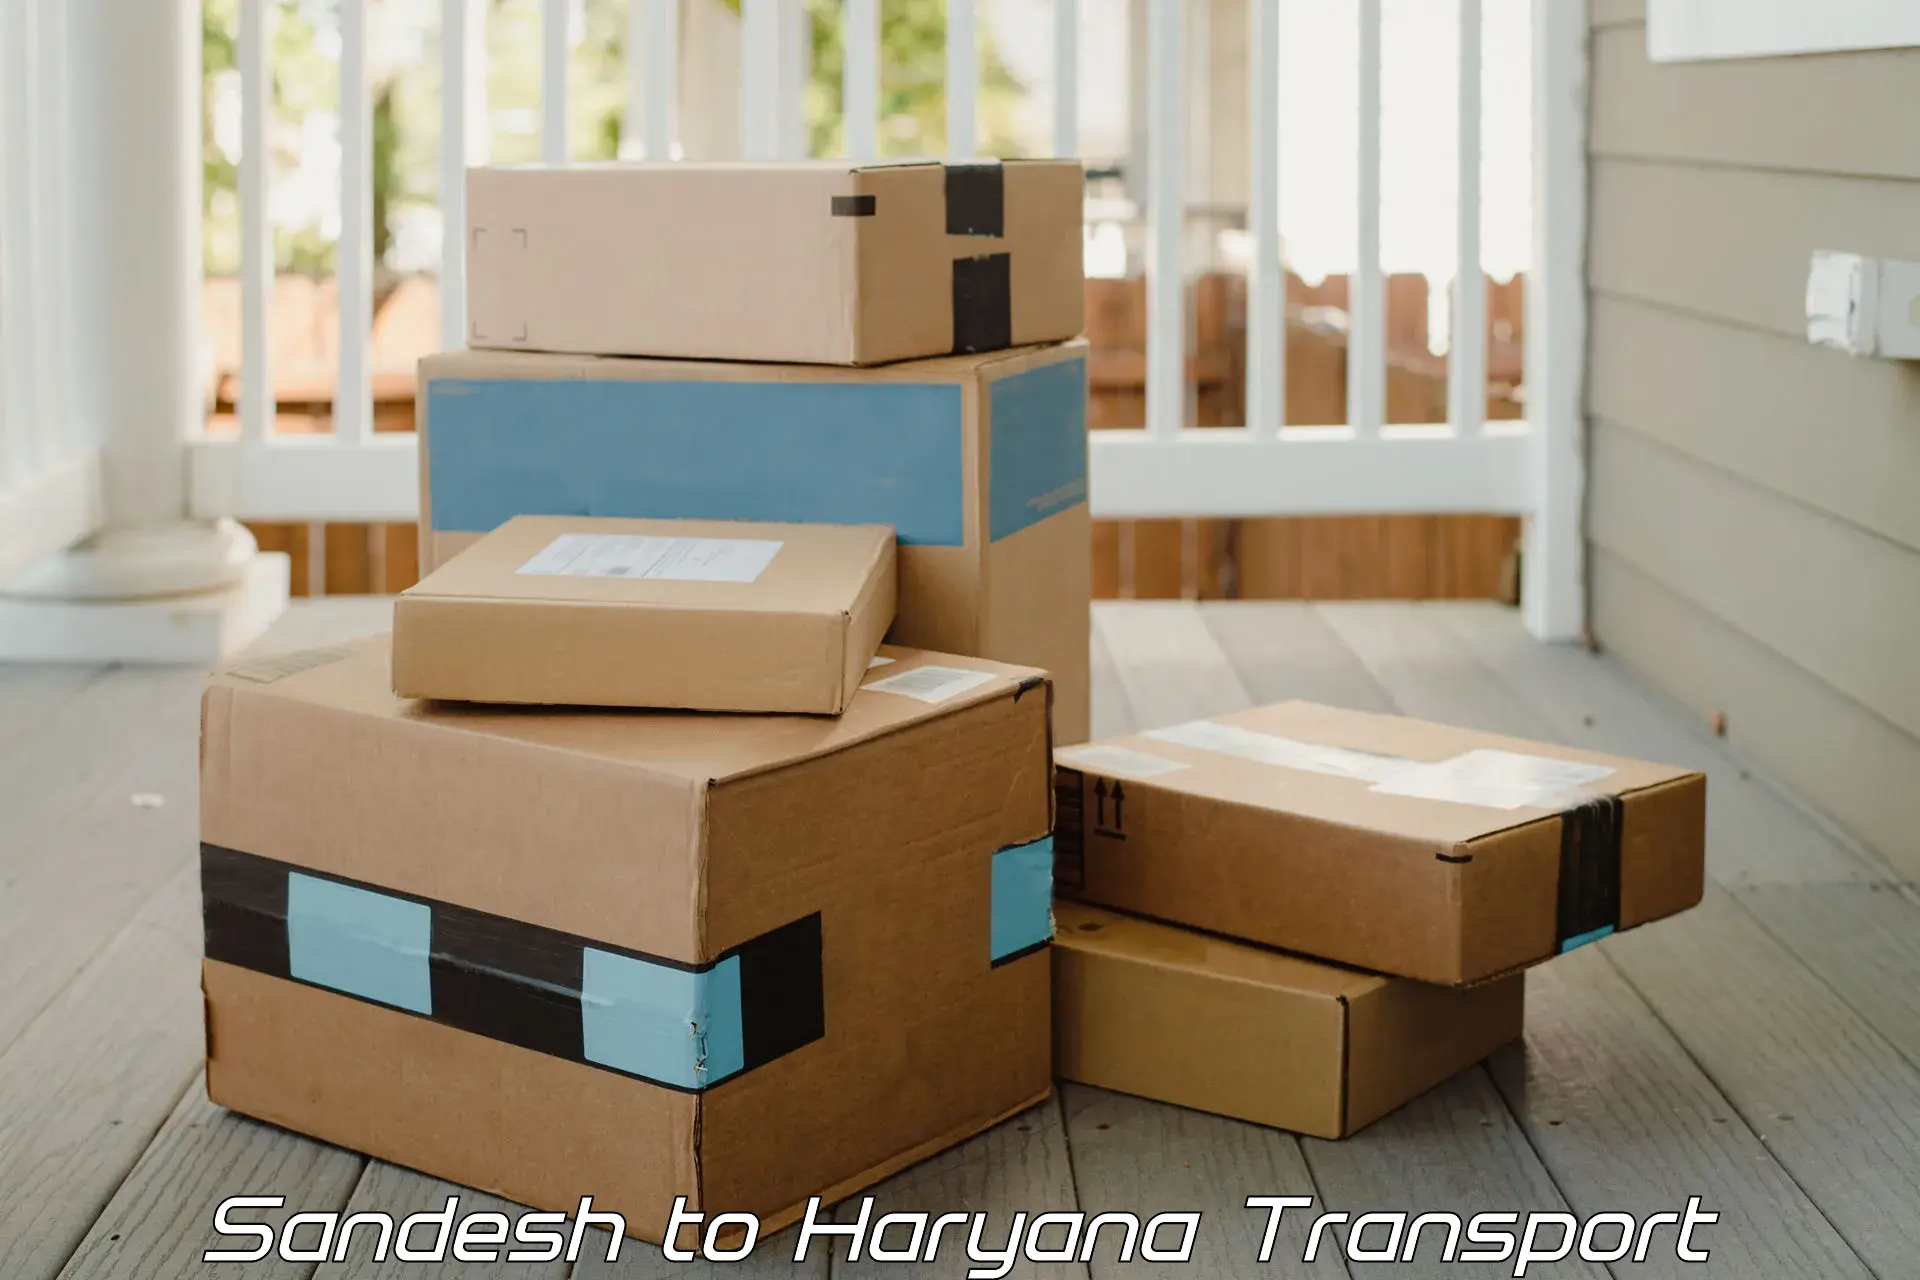 Vehicle courier services Sandesh to Haryana